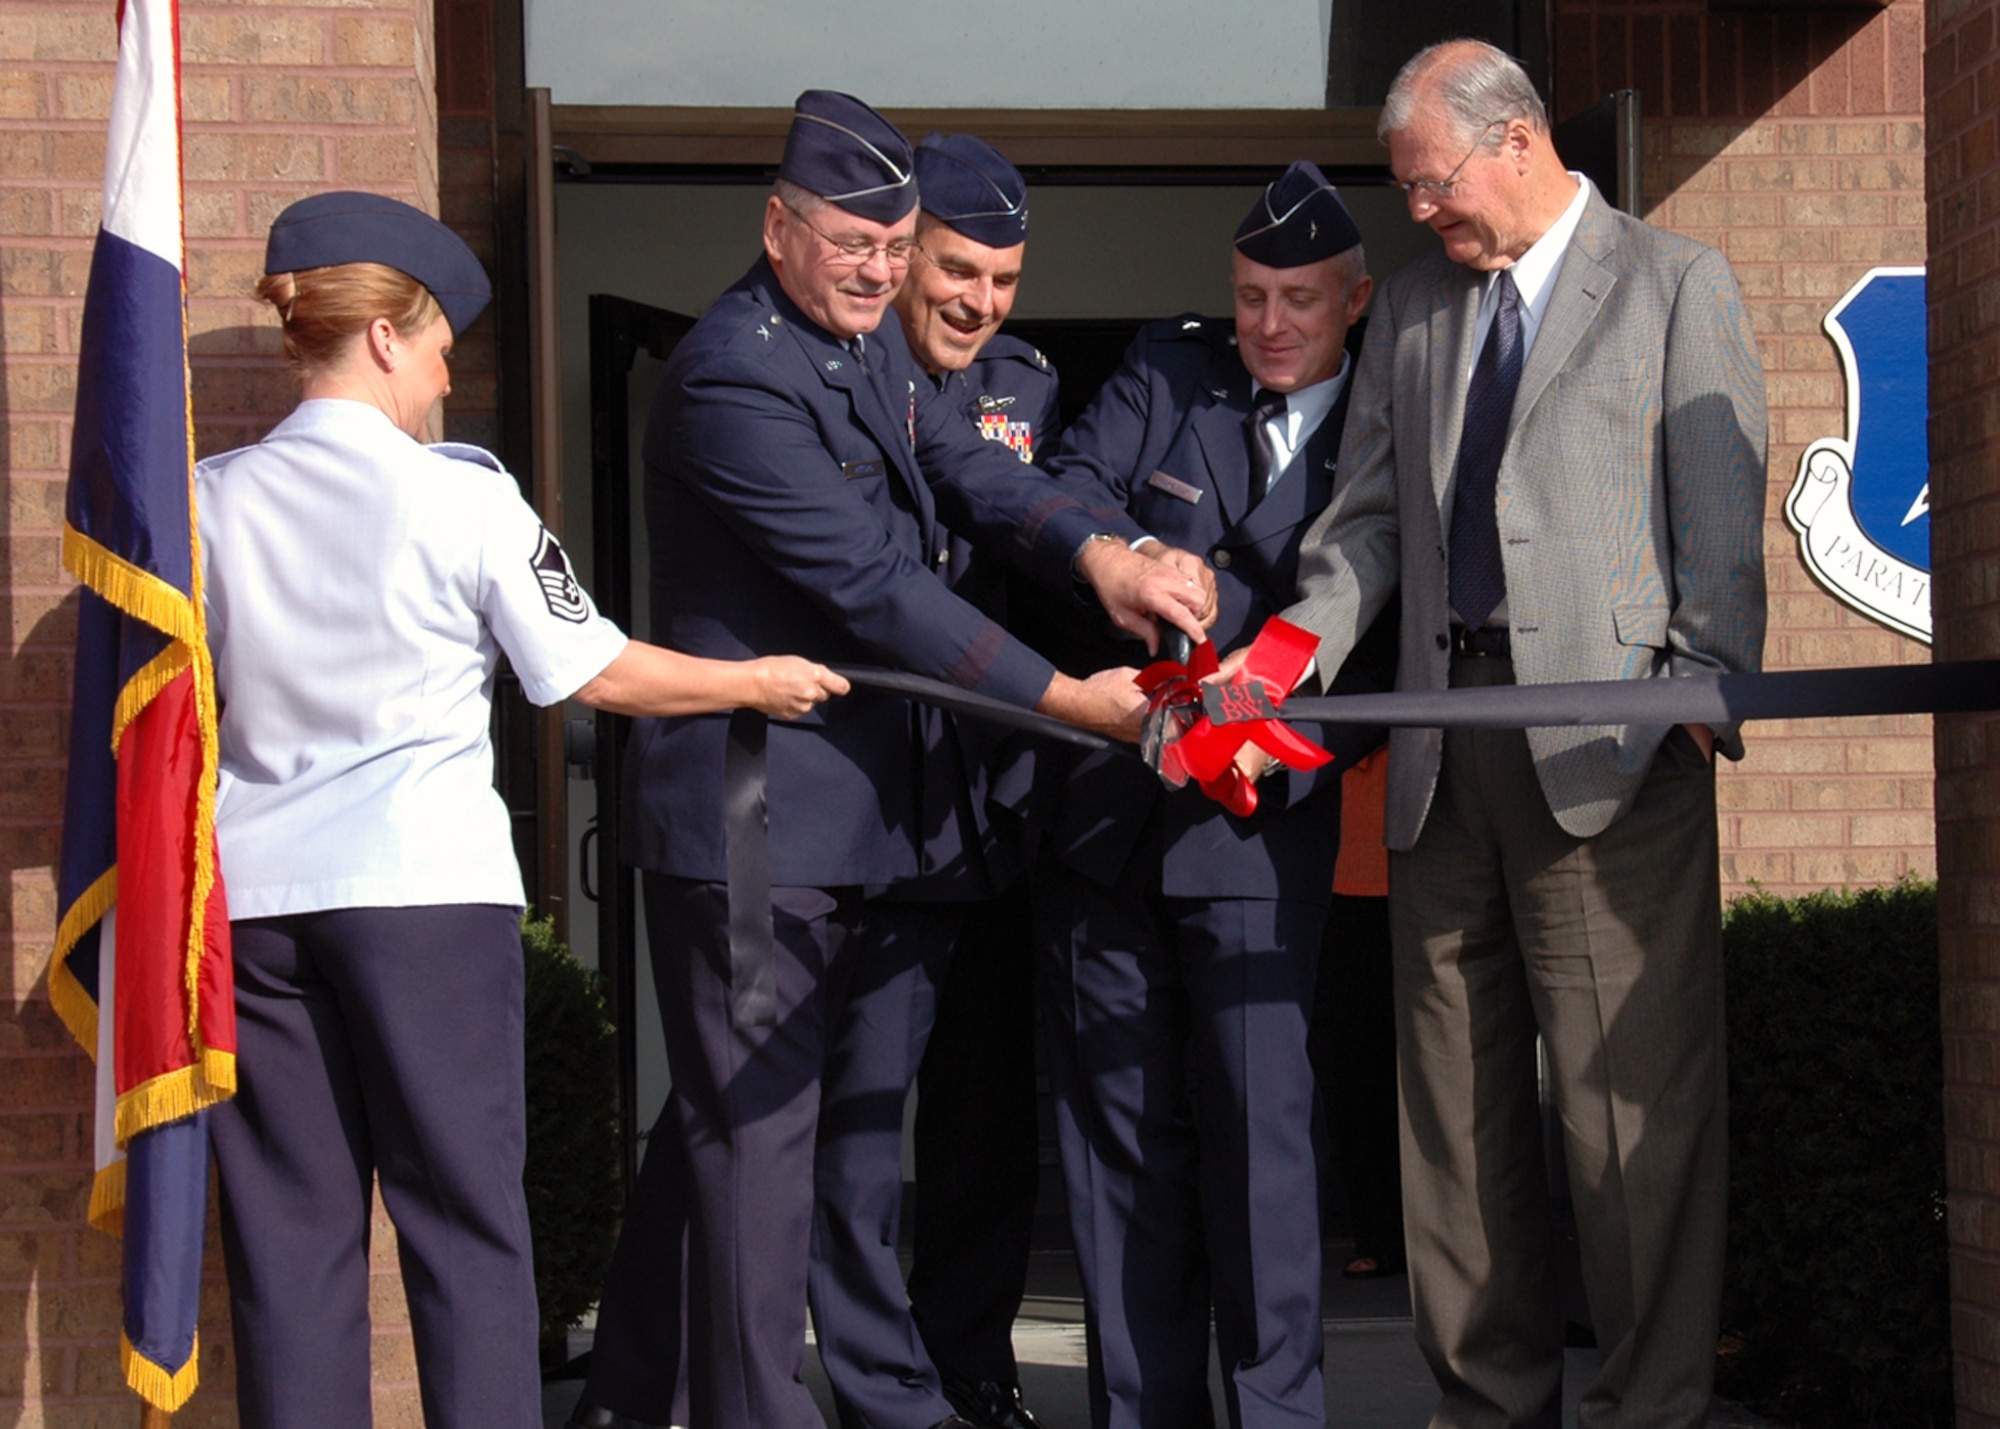 Brig. Gen. Craig D. McCord, Col. Robert L. Leeker, Brig. Gen. Garrett Harencak, and Congressman Ike Skelton participate in a ribbon cutting ceremony to commemorate the transition of the 131st Fighter Wing to the 131st Bomb Wing at Whiteman, AFB. (Photo By: Tech. Sgt. Megan Hunter)